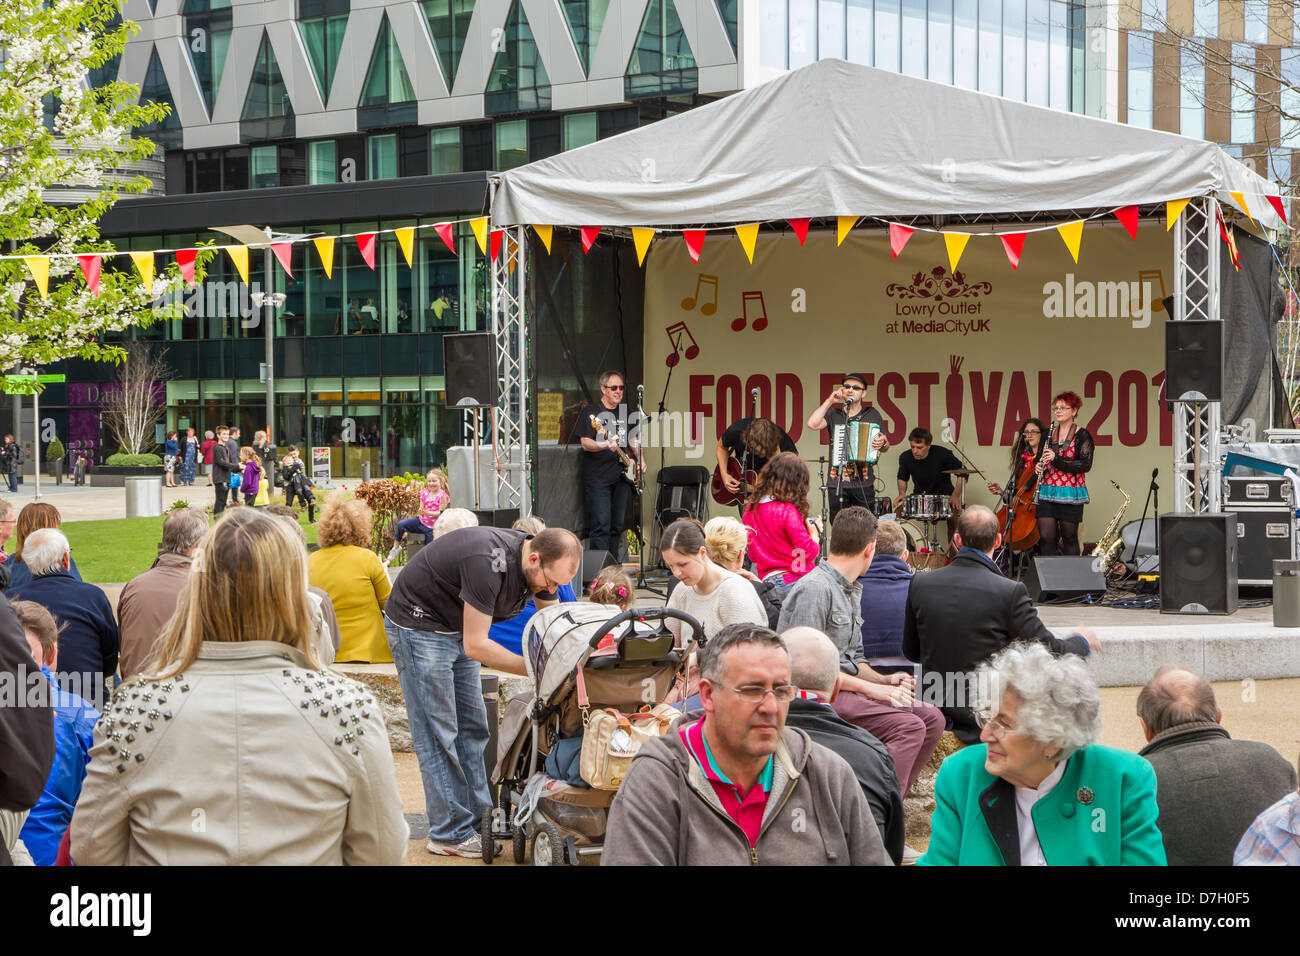 Salford, UK. 5th May 2013. Folk band Lazlo Baby perform at the first ever Lowry Outlet Food Festival 2013 at MediaCity in Salford Quays. Credit: Andrew Barker/Alamy Live News Stock Photo